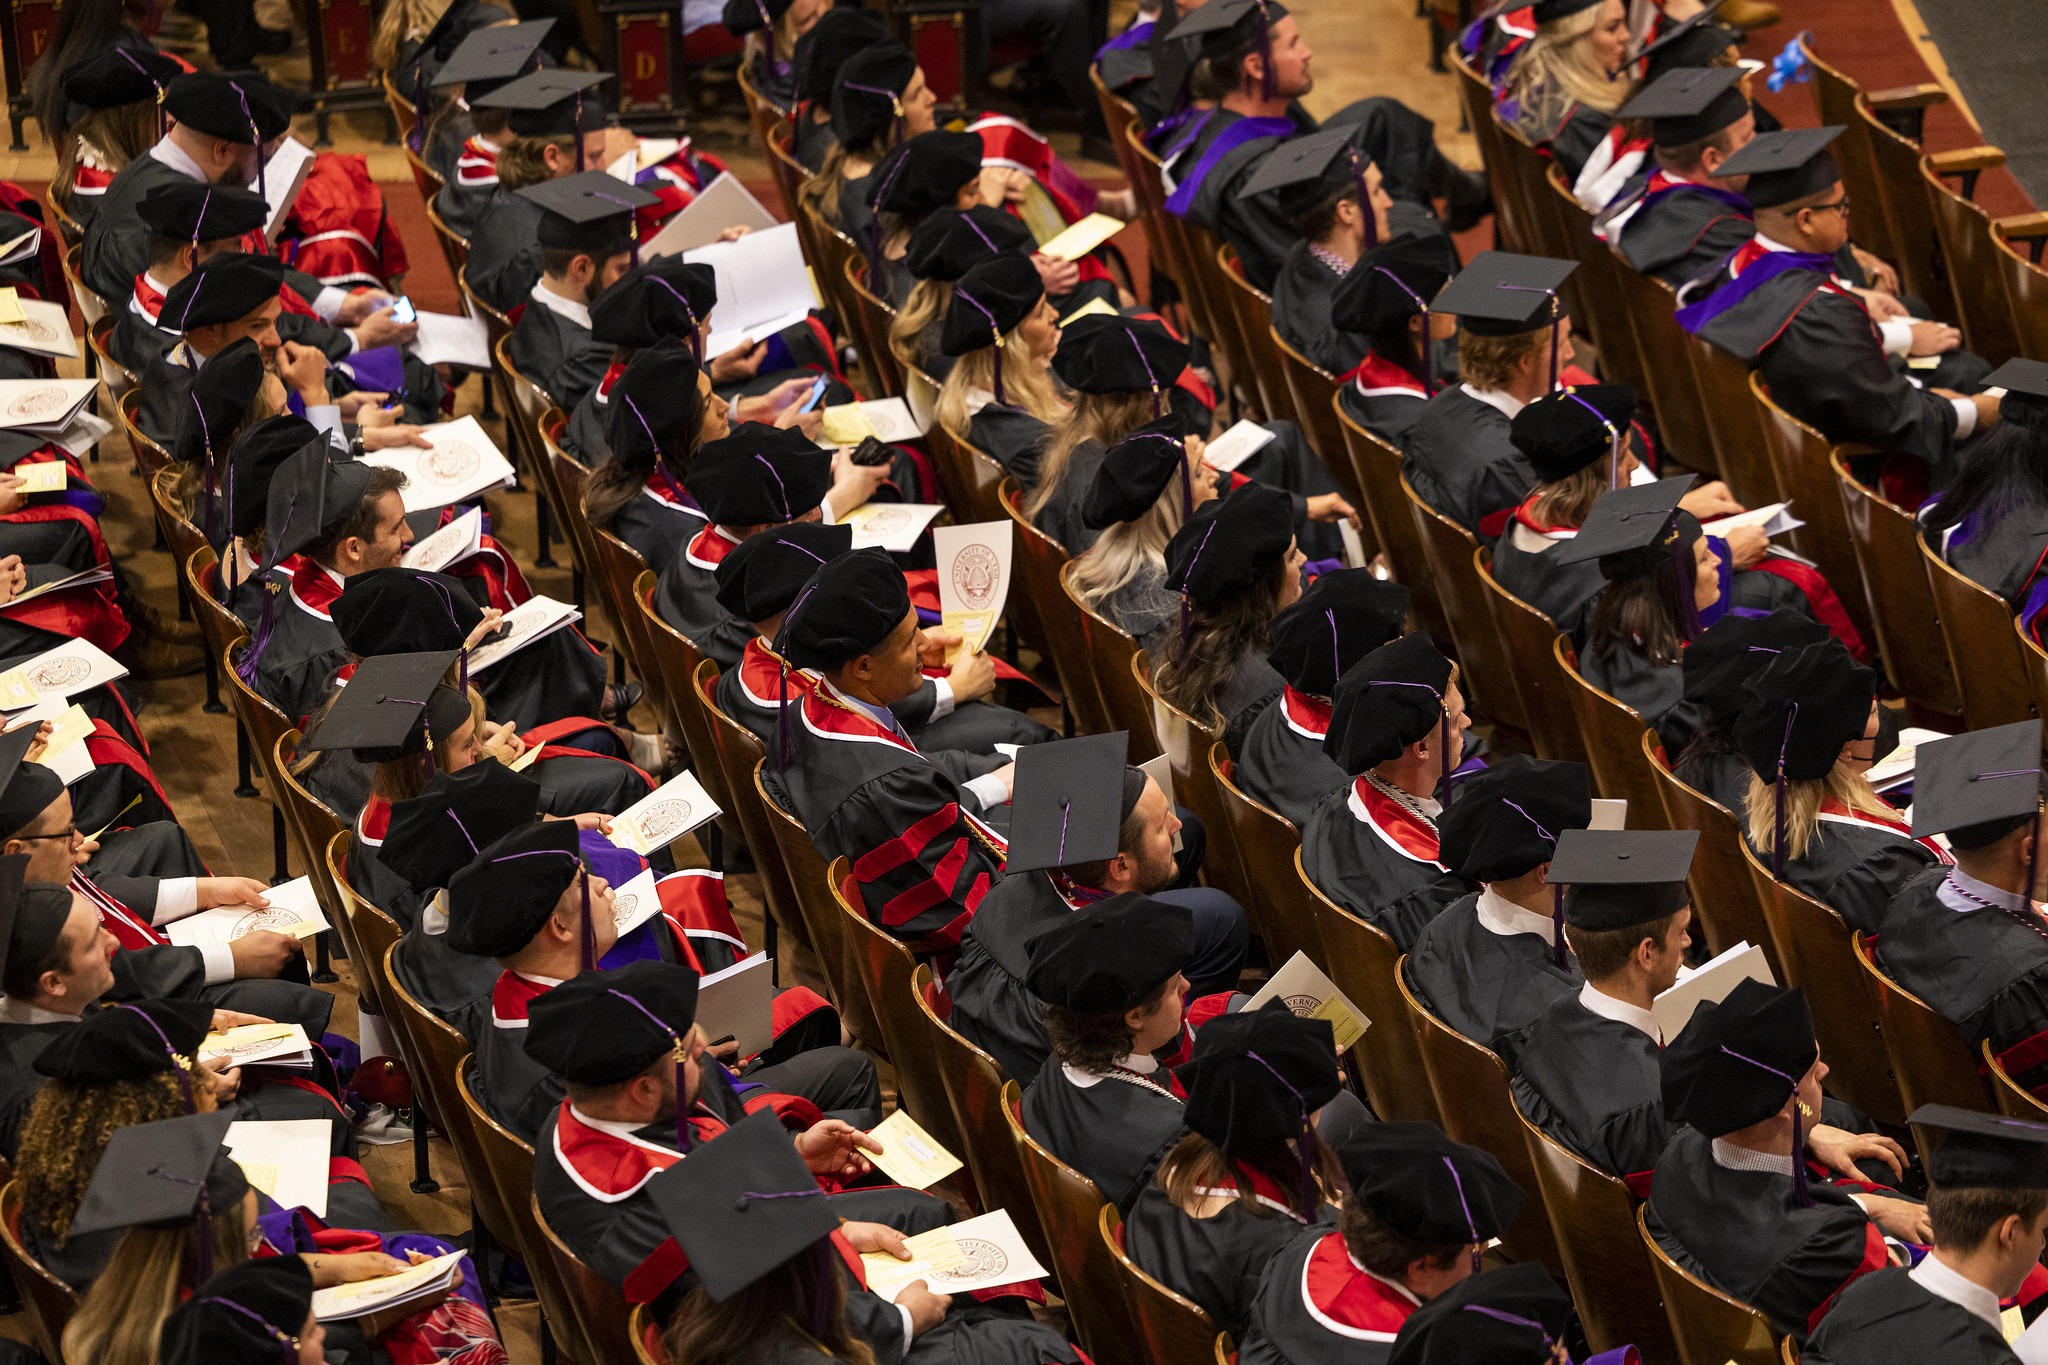 A group of graduating students sitting in rows of seats in an auditorium, all wearing graduation gowns and mortarboard hats.